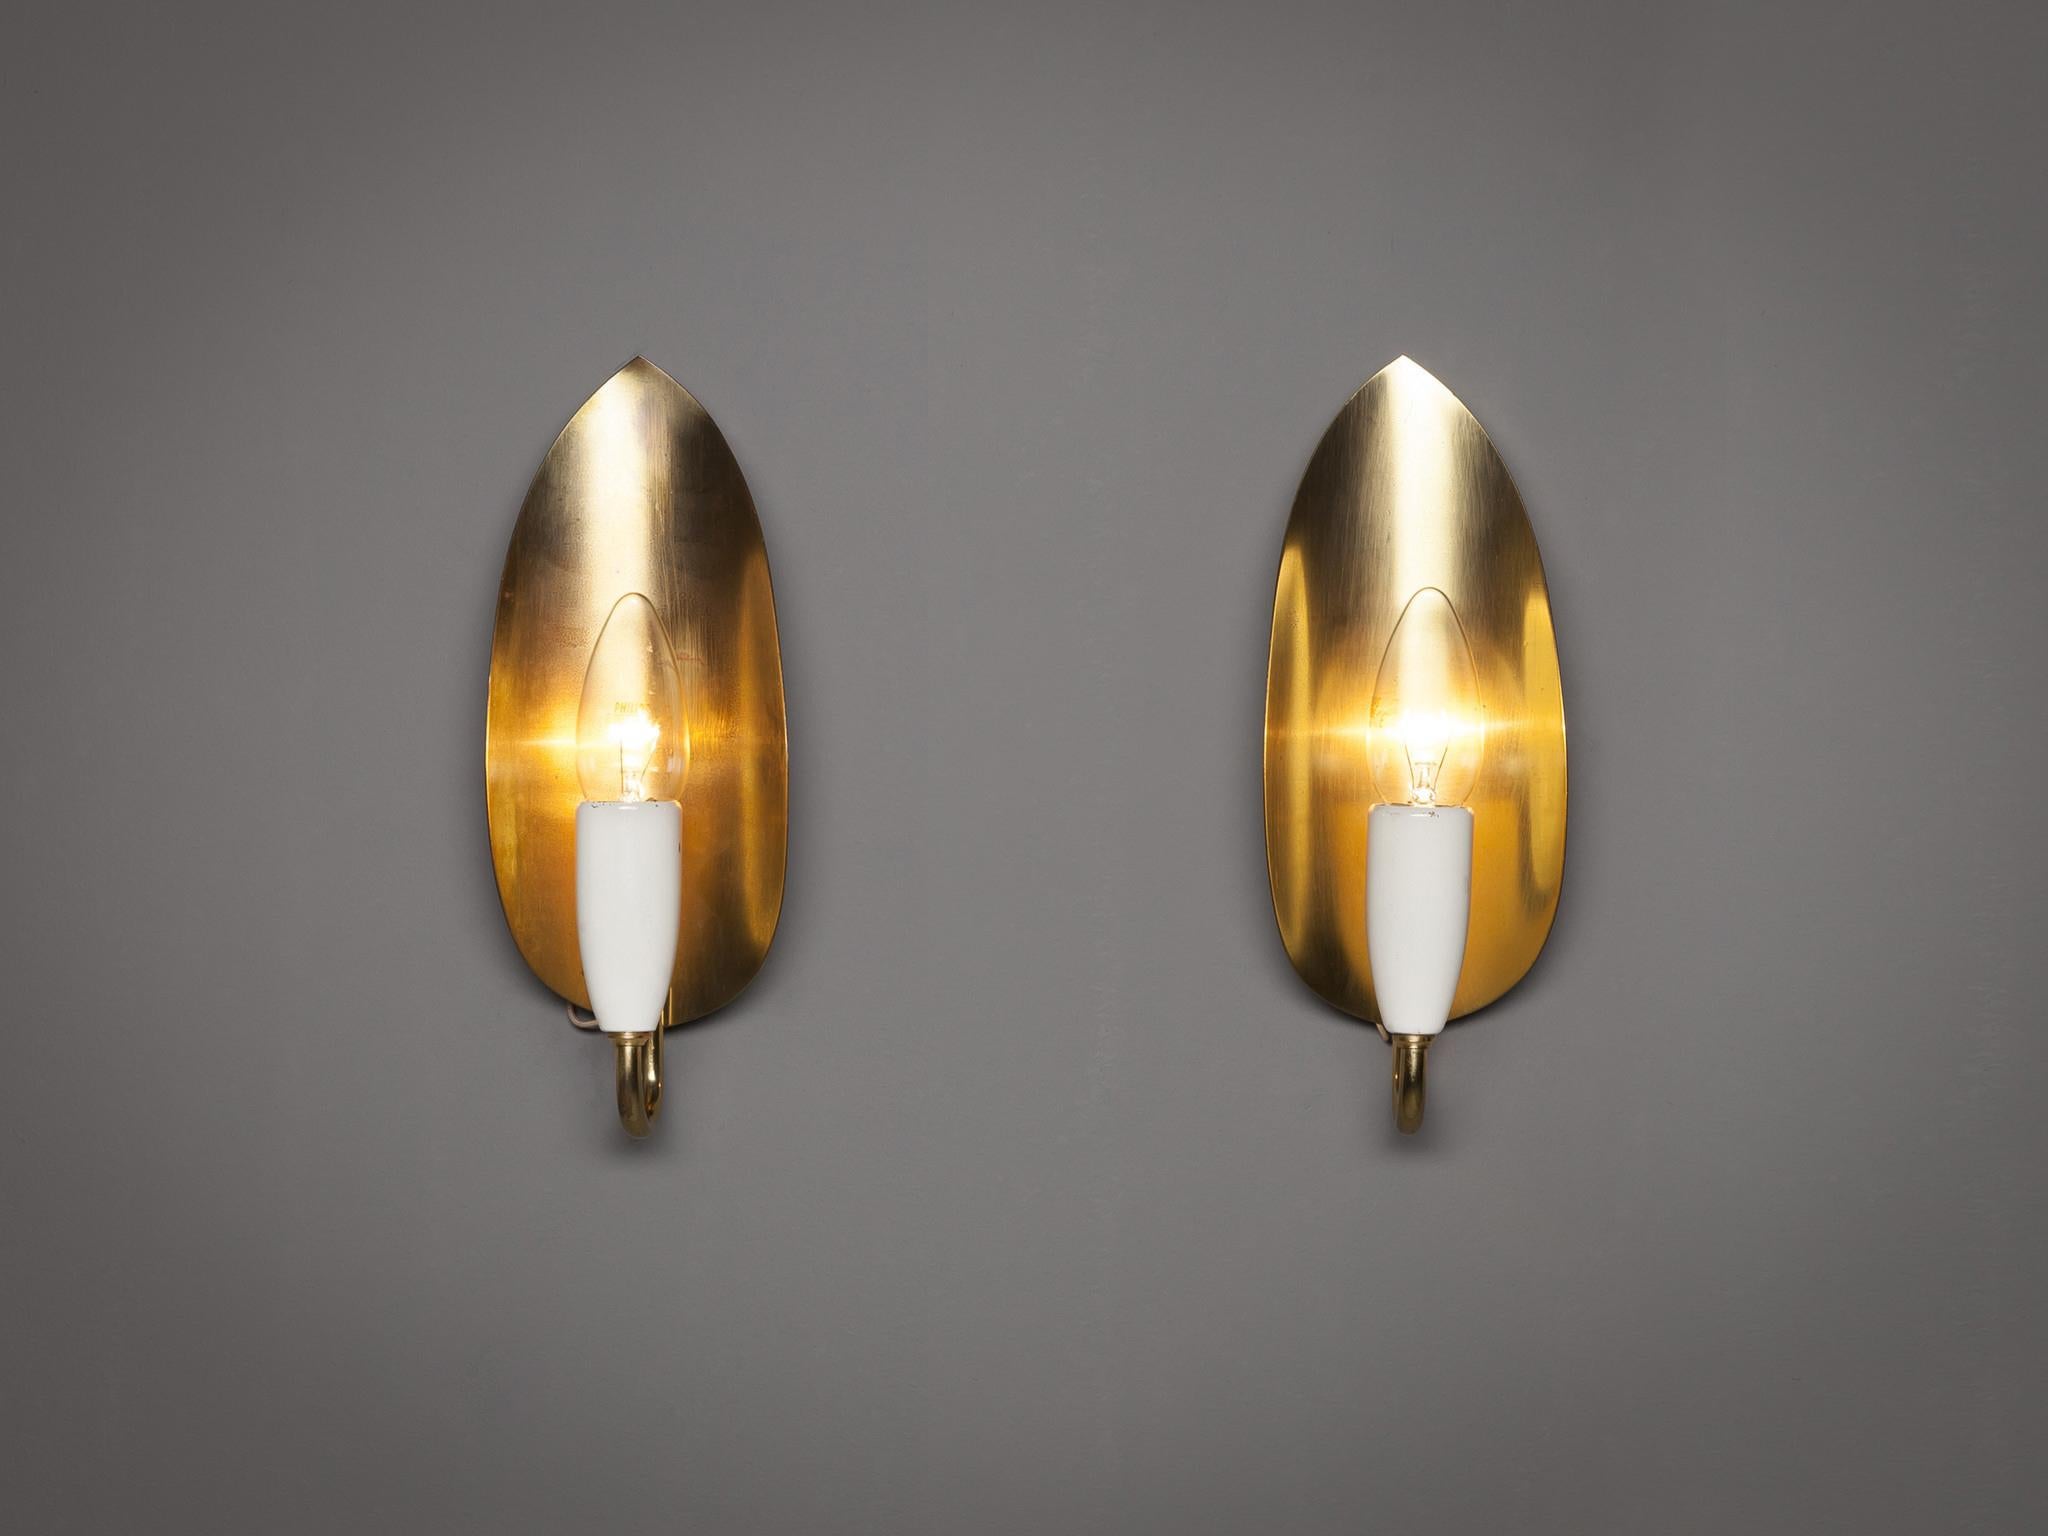 Pair of wall lights, brass, lacquered metal, Europe, 1960s.

A lovely pair of wall lights that resemble a modern candle holder. A curved rod holds the light bulb in place, which is attached to a brass sheet in the shape of an abstract leaf. The